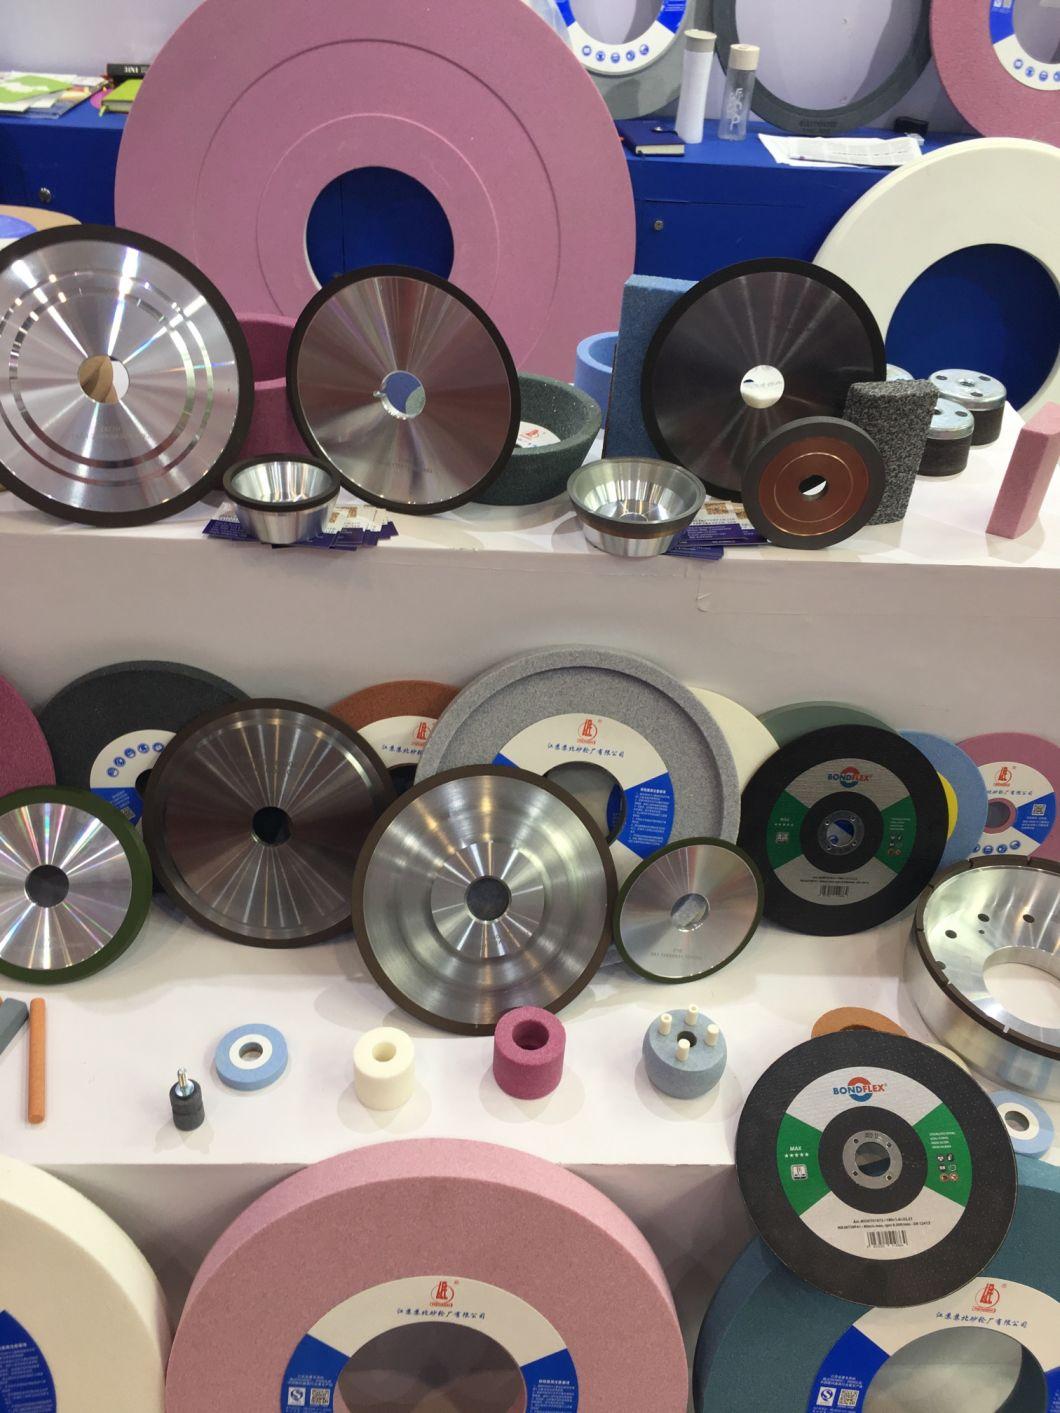 Cylindrical External Wheels, Abrasives and Grinding Wheels